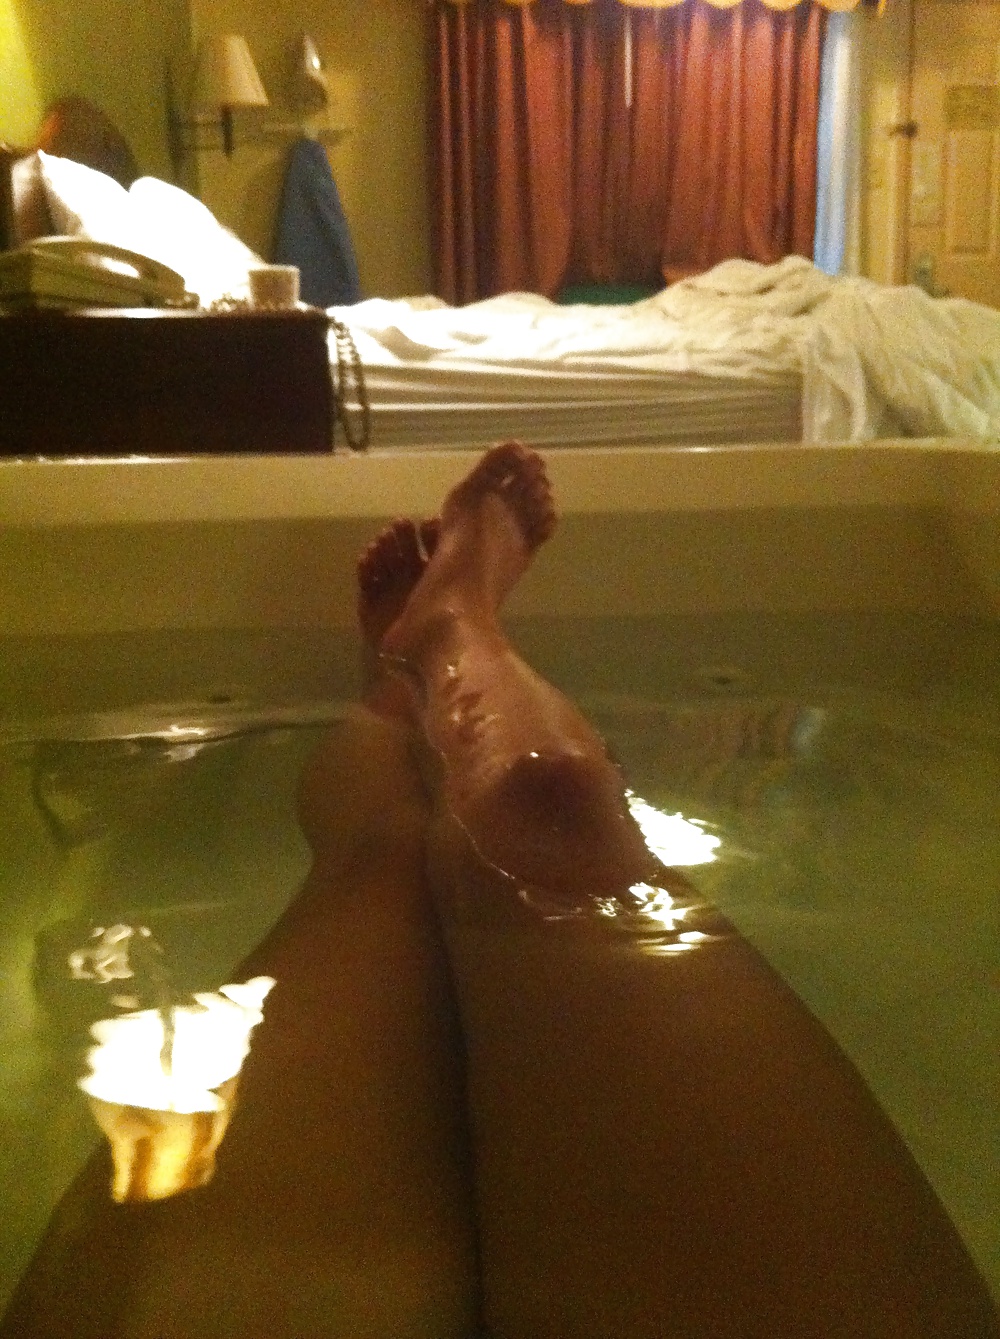 While waiting for hubby to join me in the jet tub #40079129